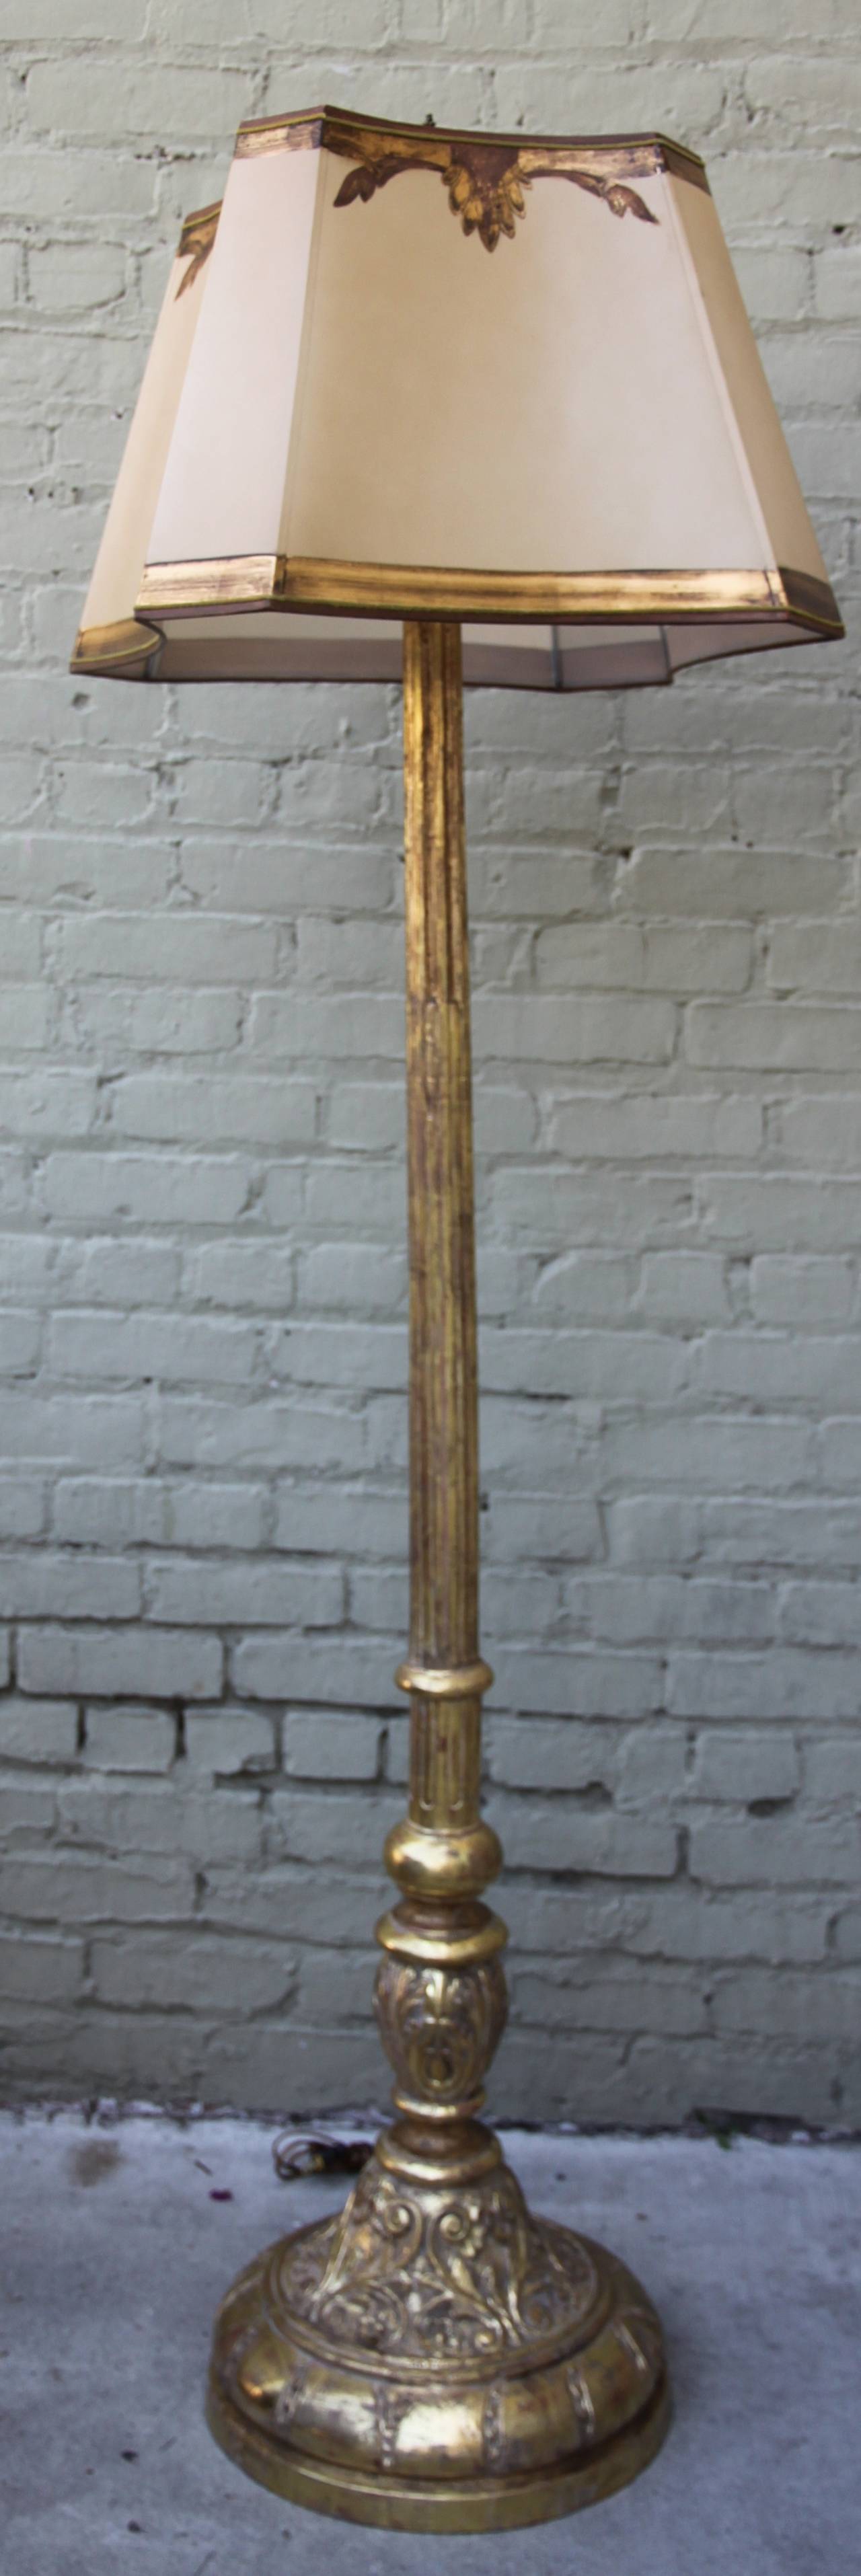 19th century Italian carved 22-karat giltwood standing lamp with a custom hand-painted parchment shade.